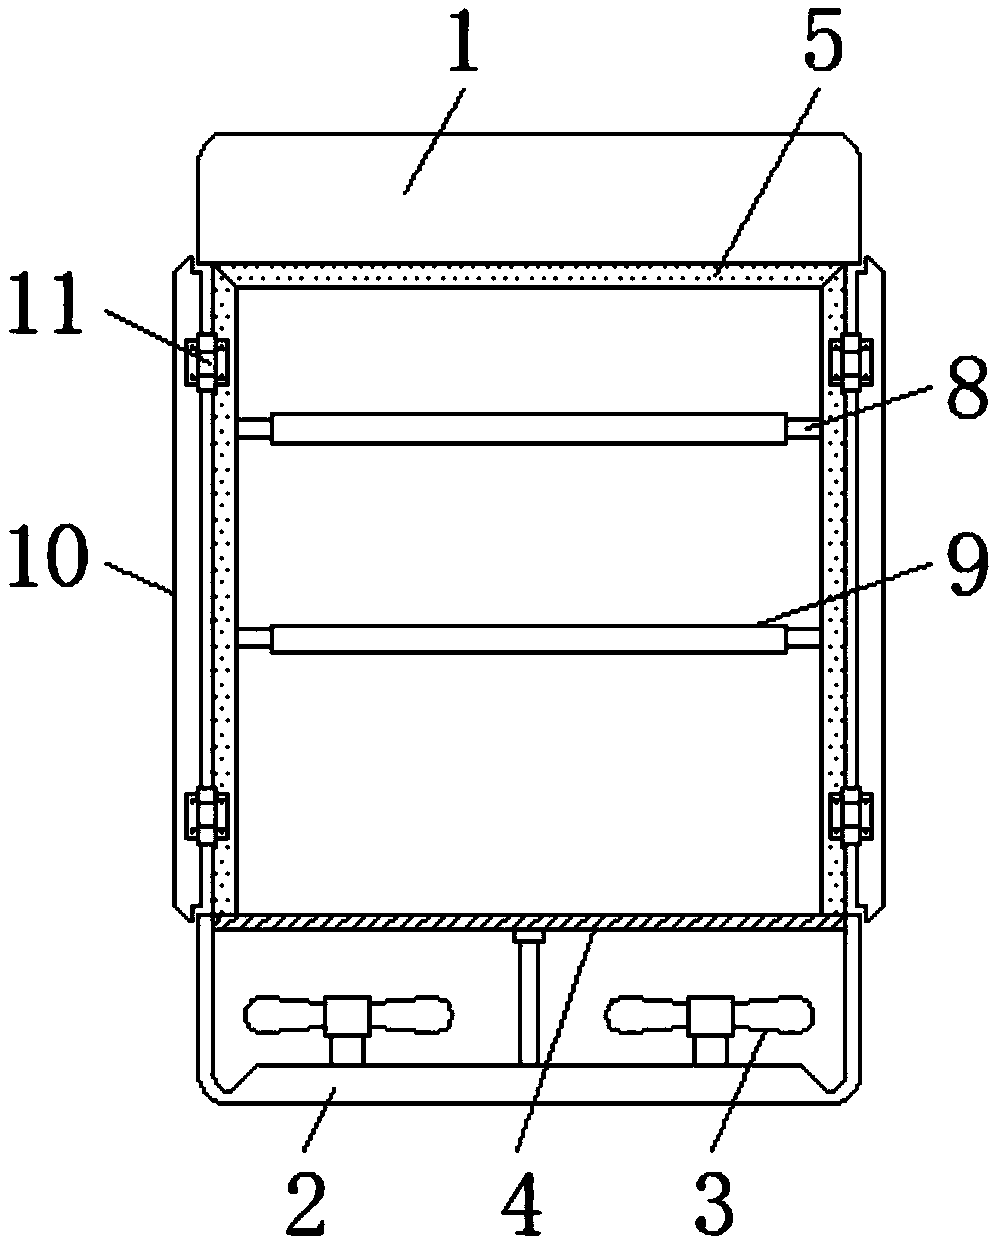 Resonance elimination compensation cabinet convenient to overhaul and dissipate heat